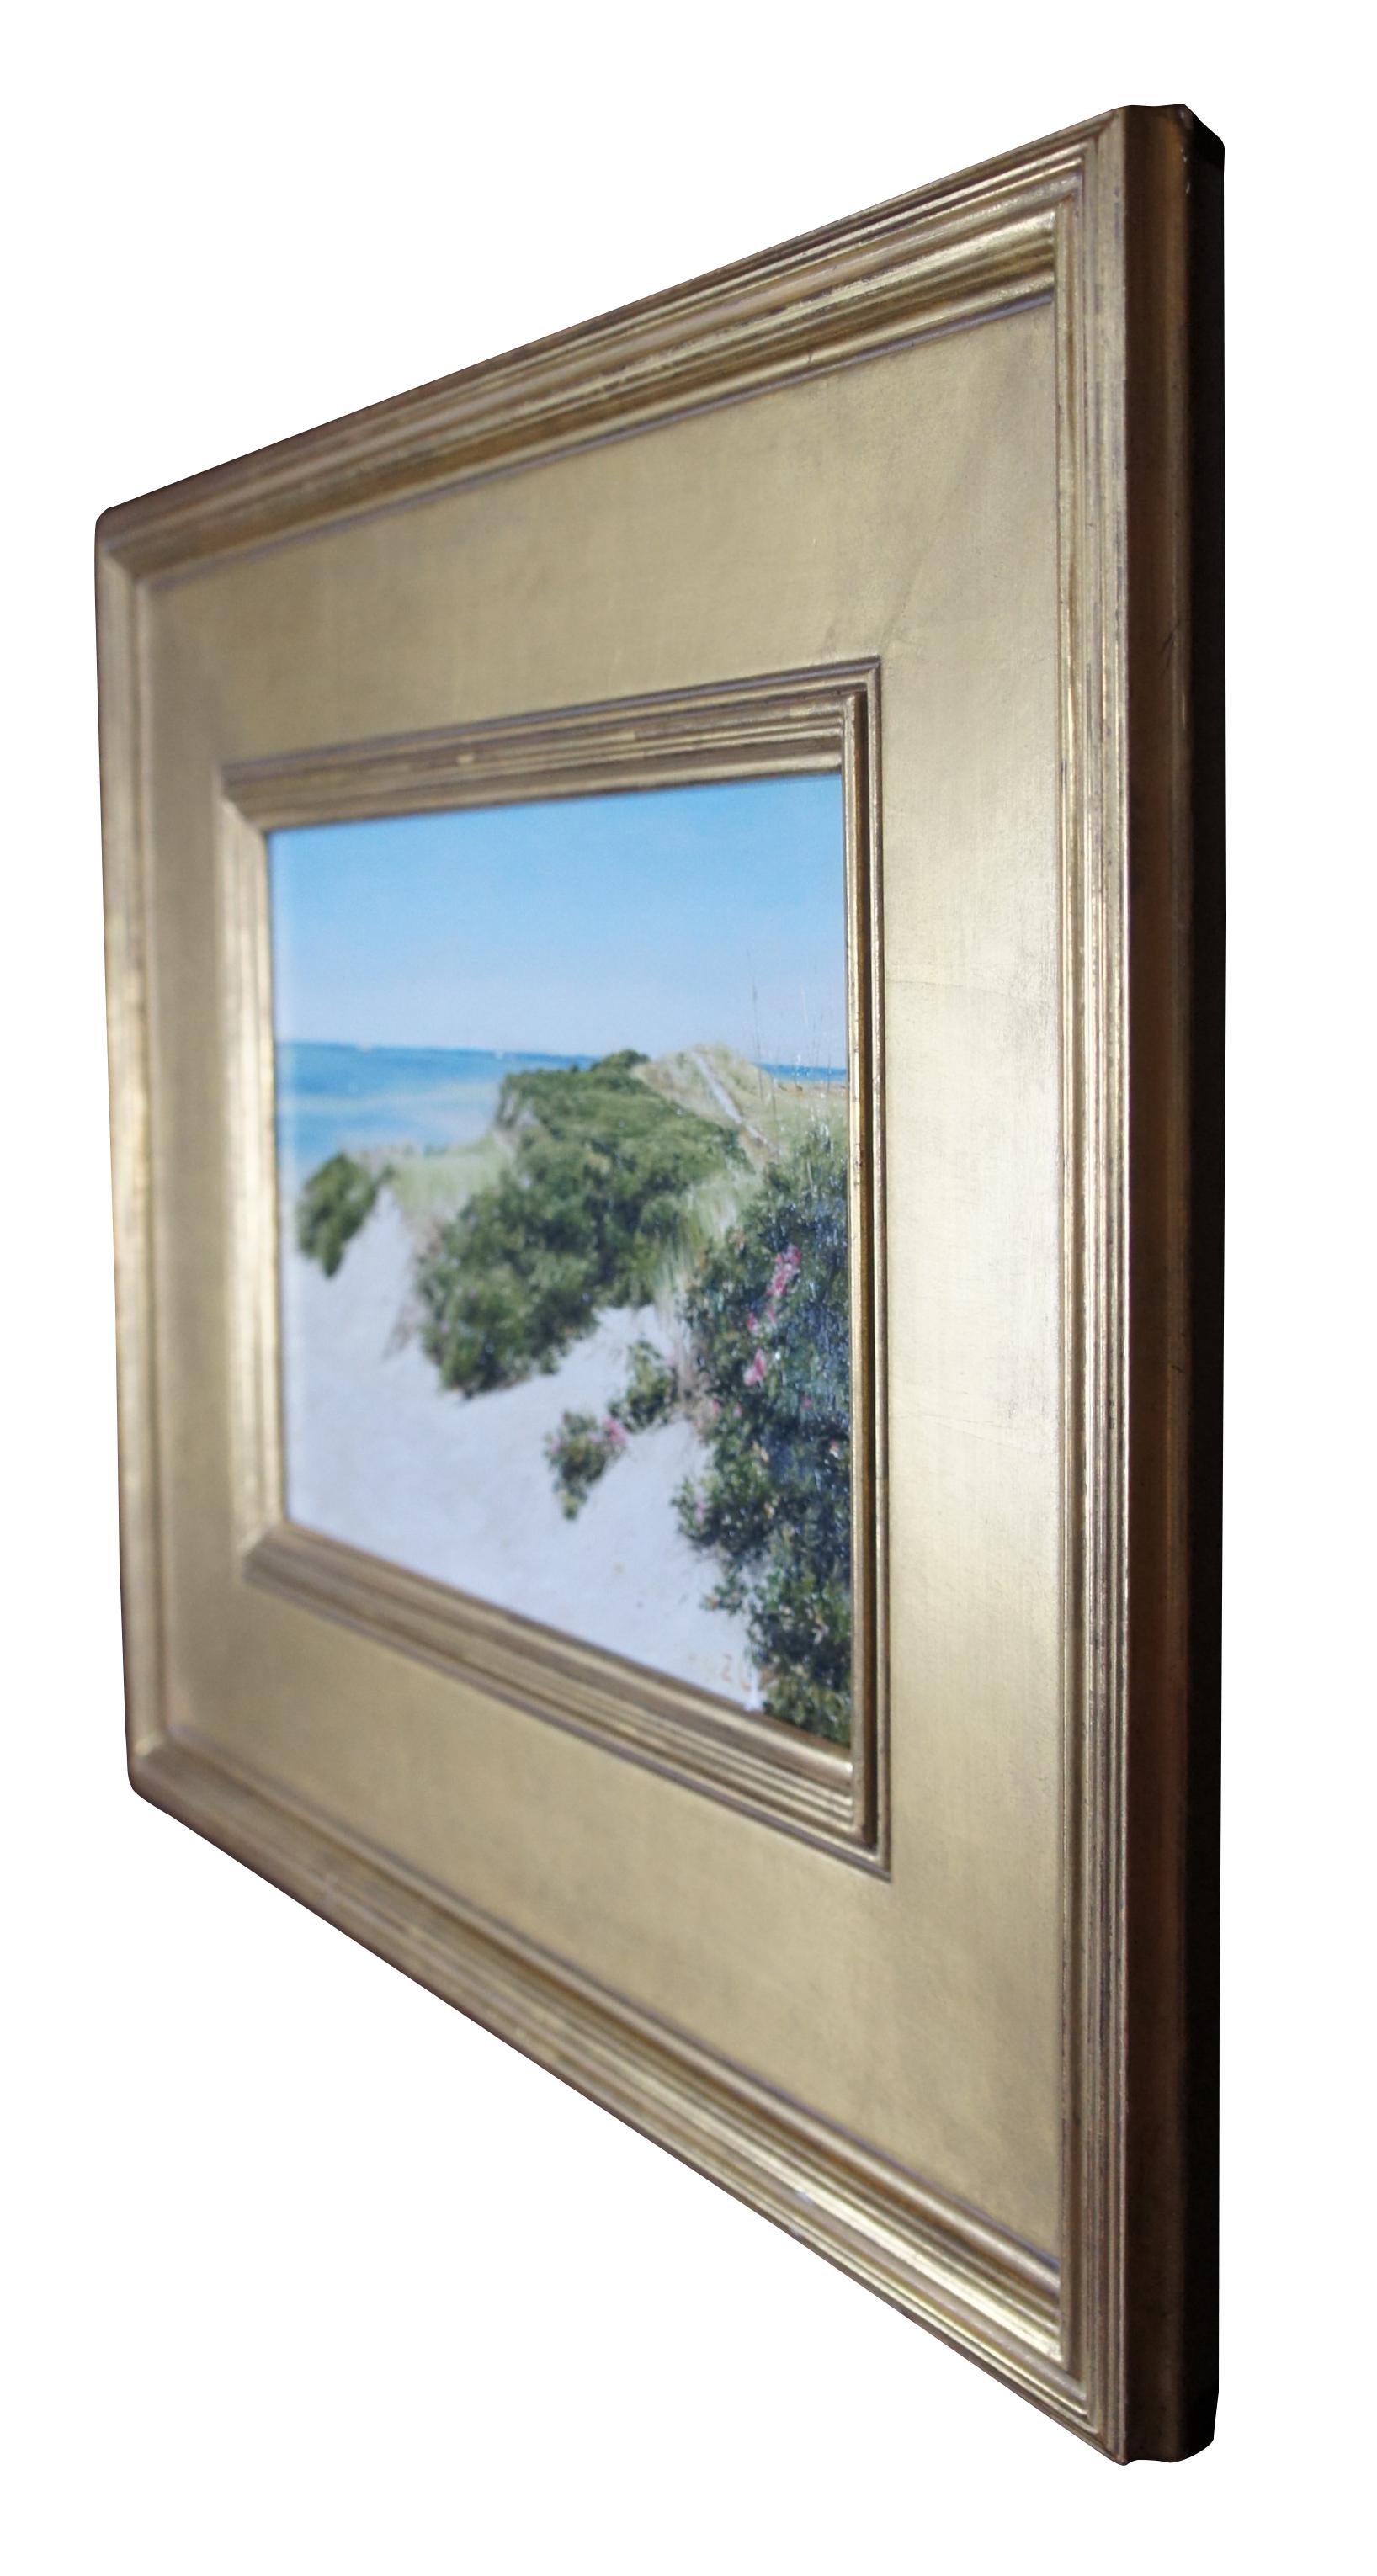 Vintage Lori Zummo Nantucket landscape / seascape oil painting titled Steps Beach Dunes. 

Provenance:
Estate of J. Frederic Gagel, owner of multiple Thoroughbred race horses that competed in the Narragansett Special and Kentucky Derby. Their